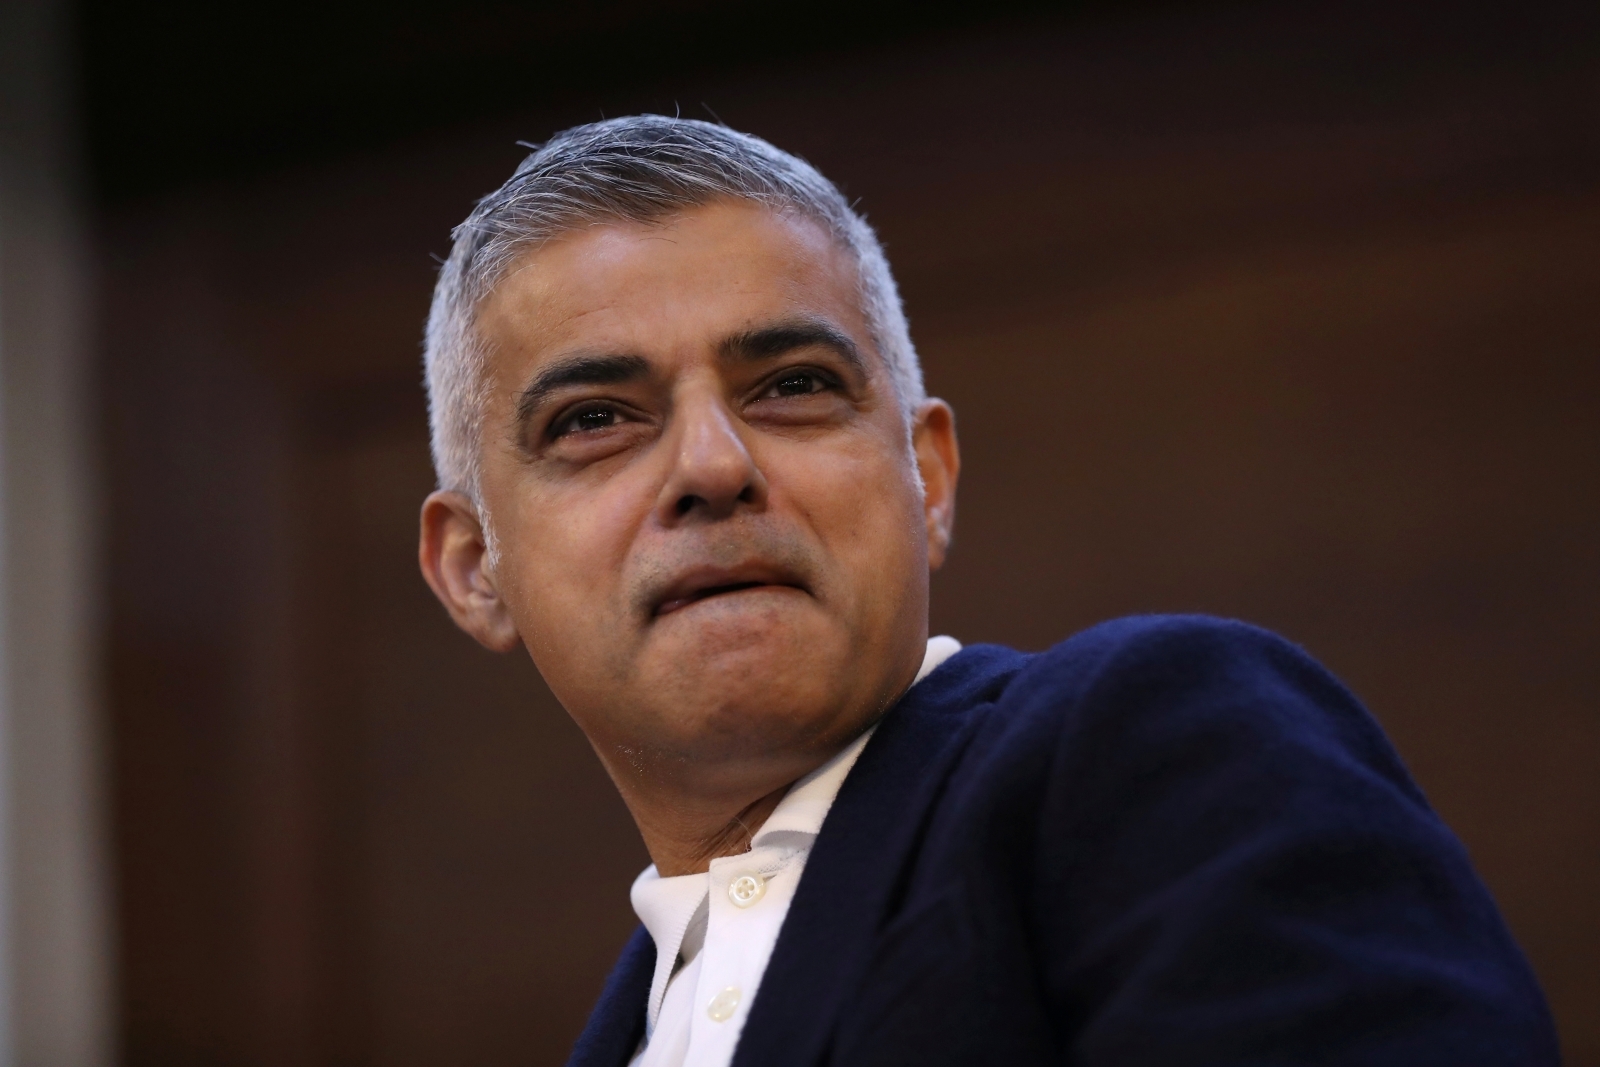 London Mayor underlines environmental action plan through book on personal struggle with air pollution